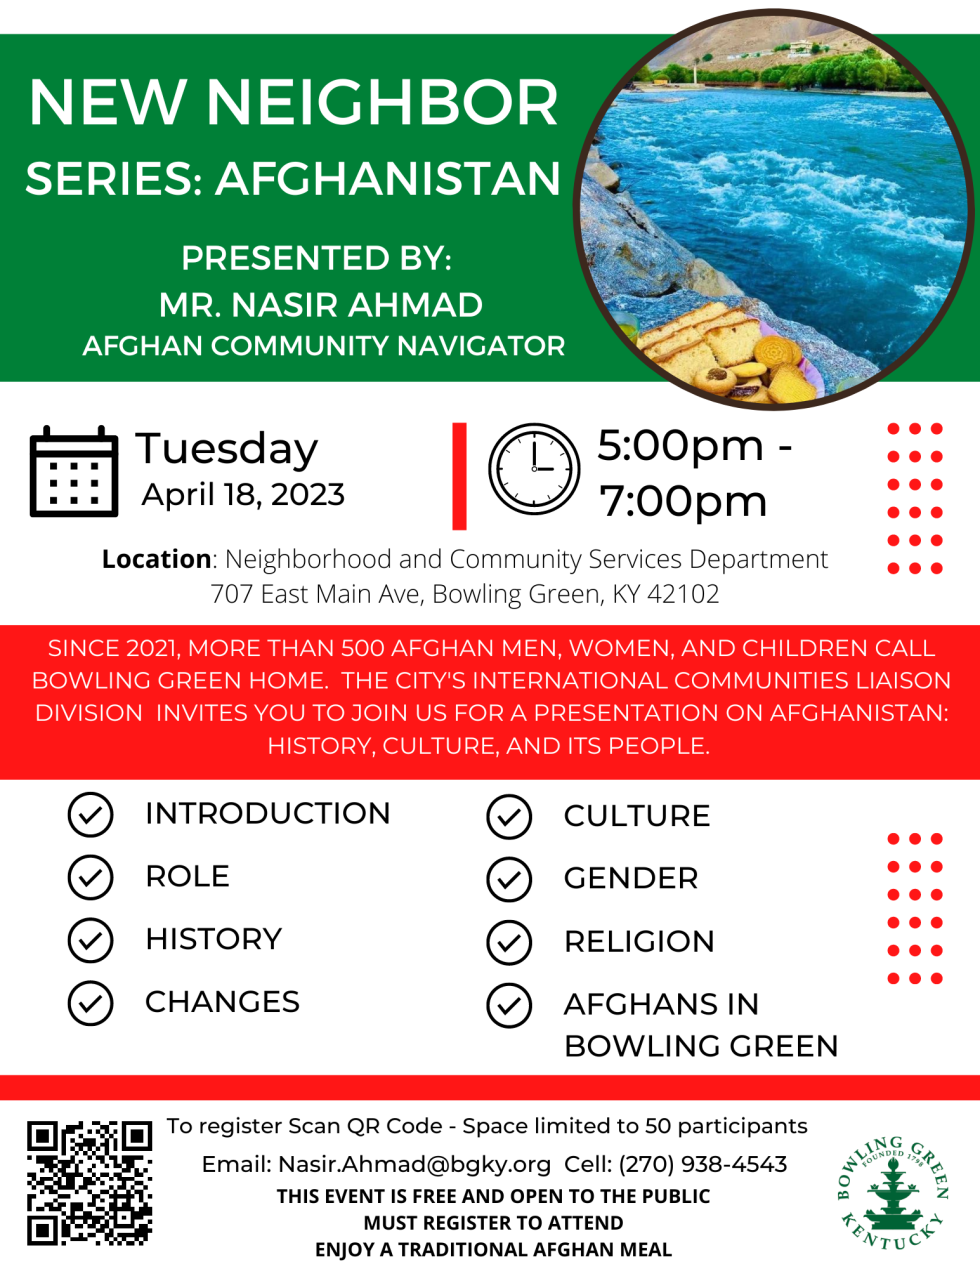 Learn about Afghan culture and history through the New Neighbor Series Afghanistan